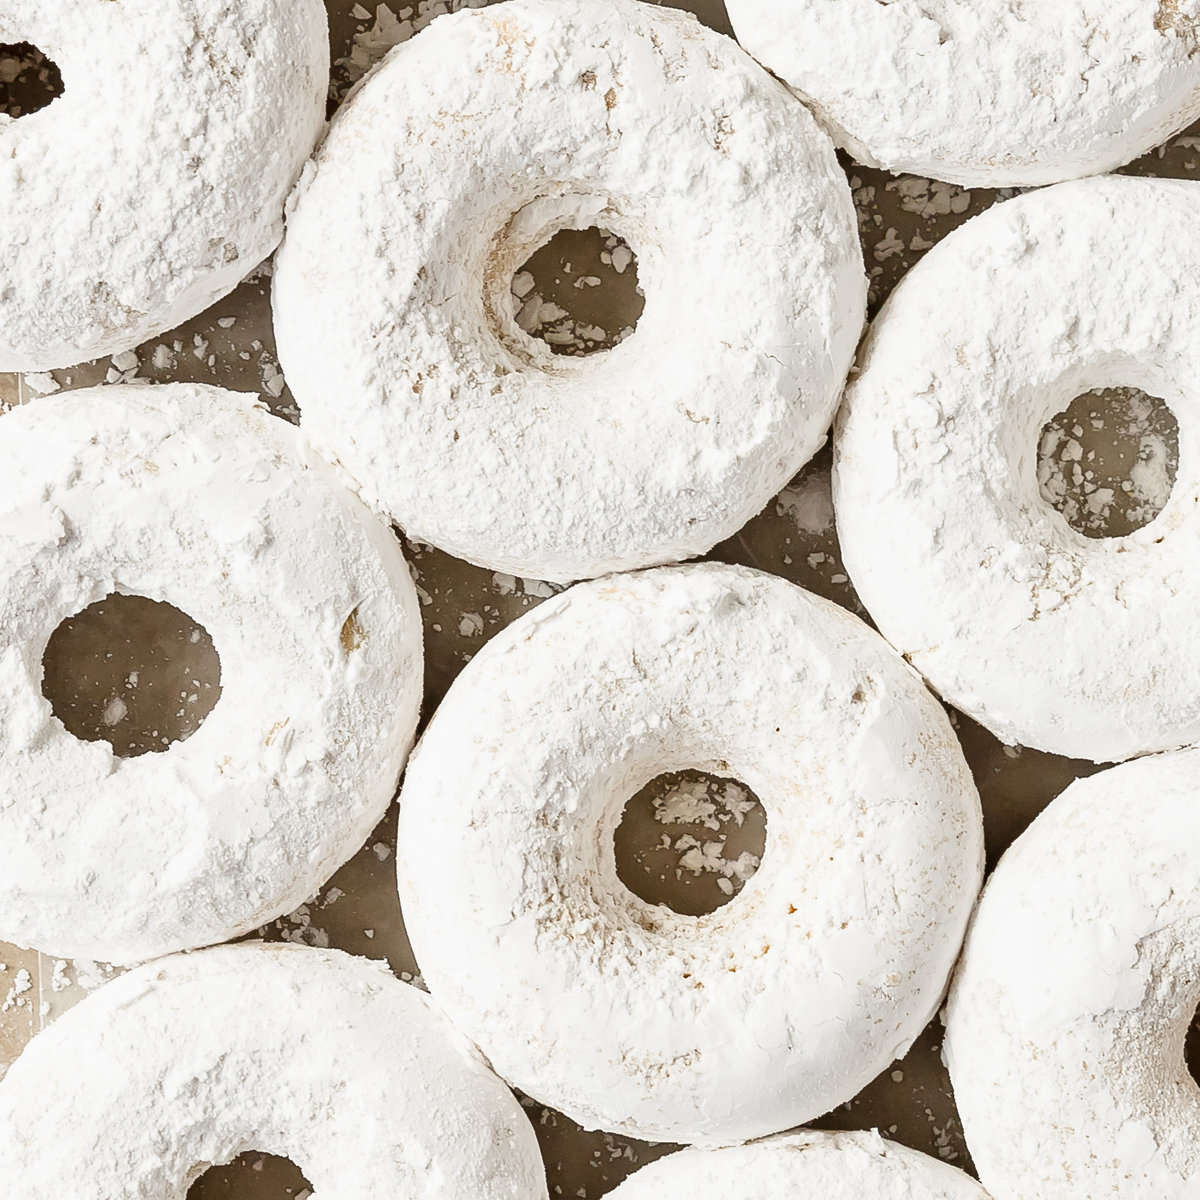 Powdered sugar donuts are soft, moist and fluffy, light;y spiced baked donuts coated in powdered sugar. These cake-style powdered donuts are quick and easy to make using two bowls, a whisk and a donut pan. If you can make muffins, you can make these cozy powder sugar donuts. 